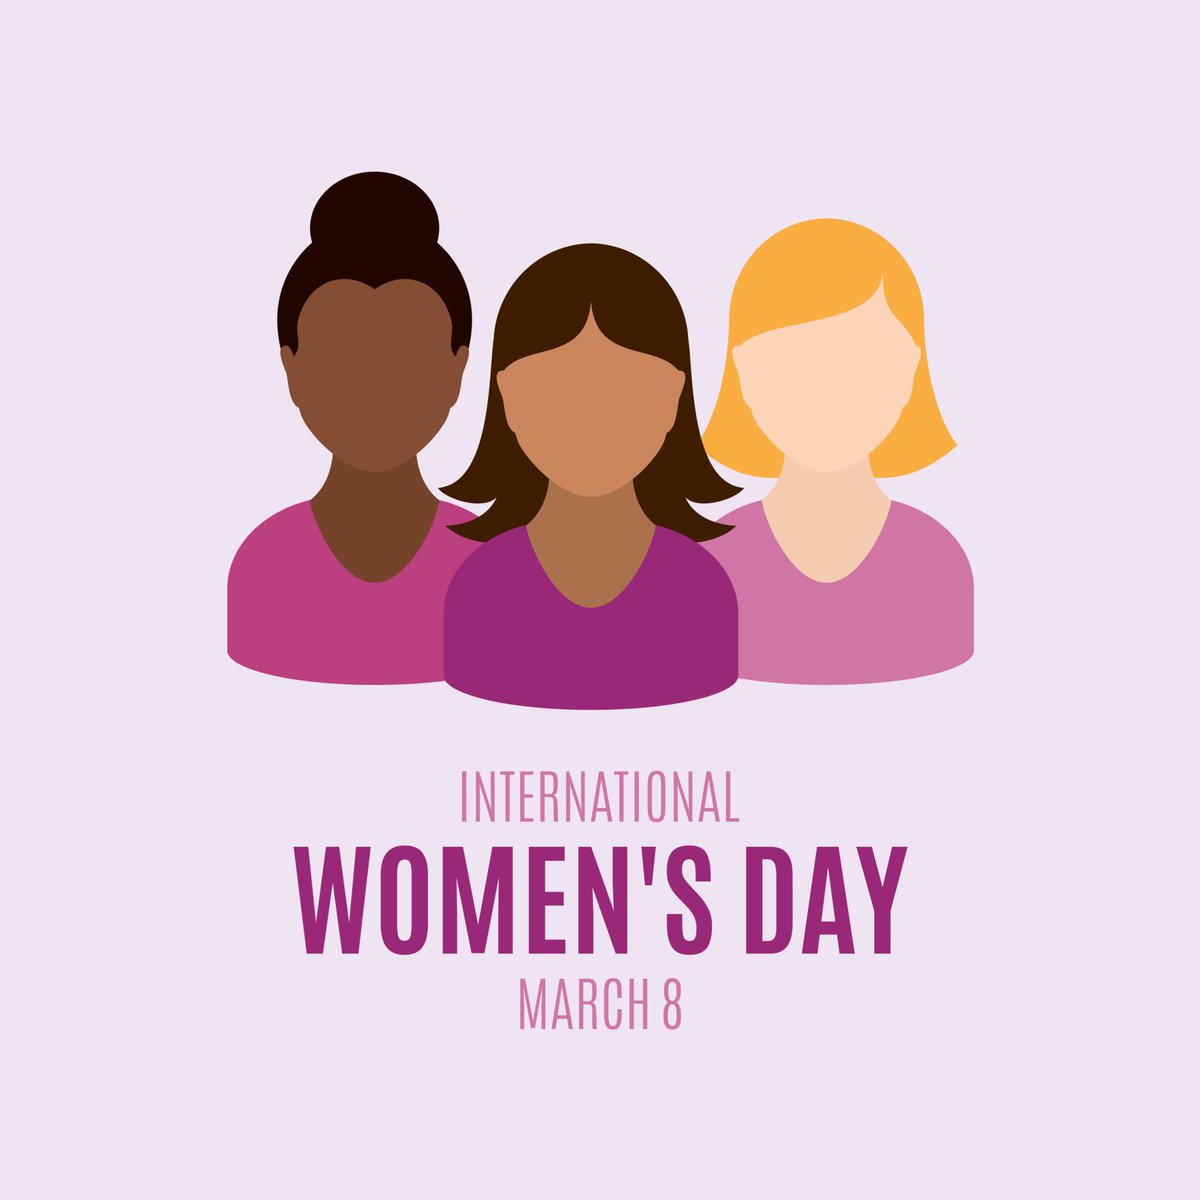 Happy international women's day to all the amazing women out there...
Question of the day: At what point did you realize she/He wasn't the one for you....
#HappyWomensDay #kadunaTwitterConnect